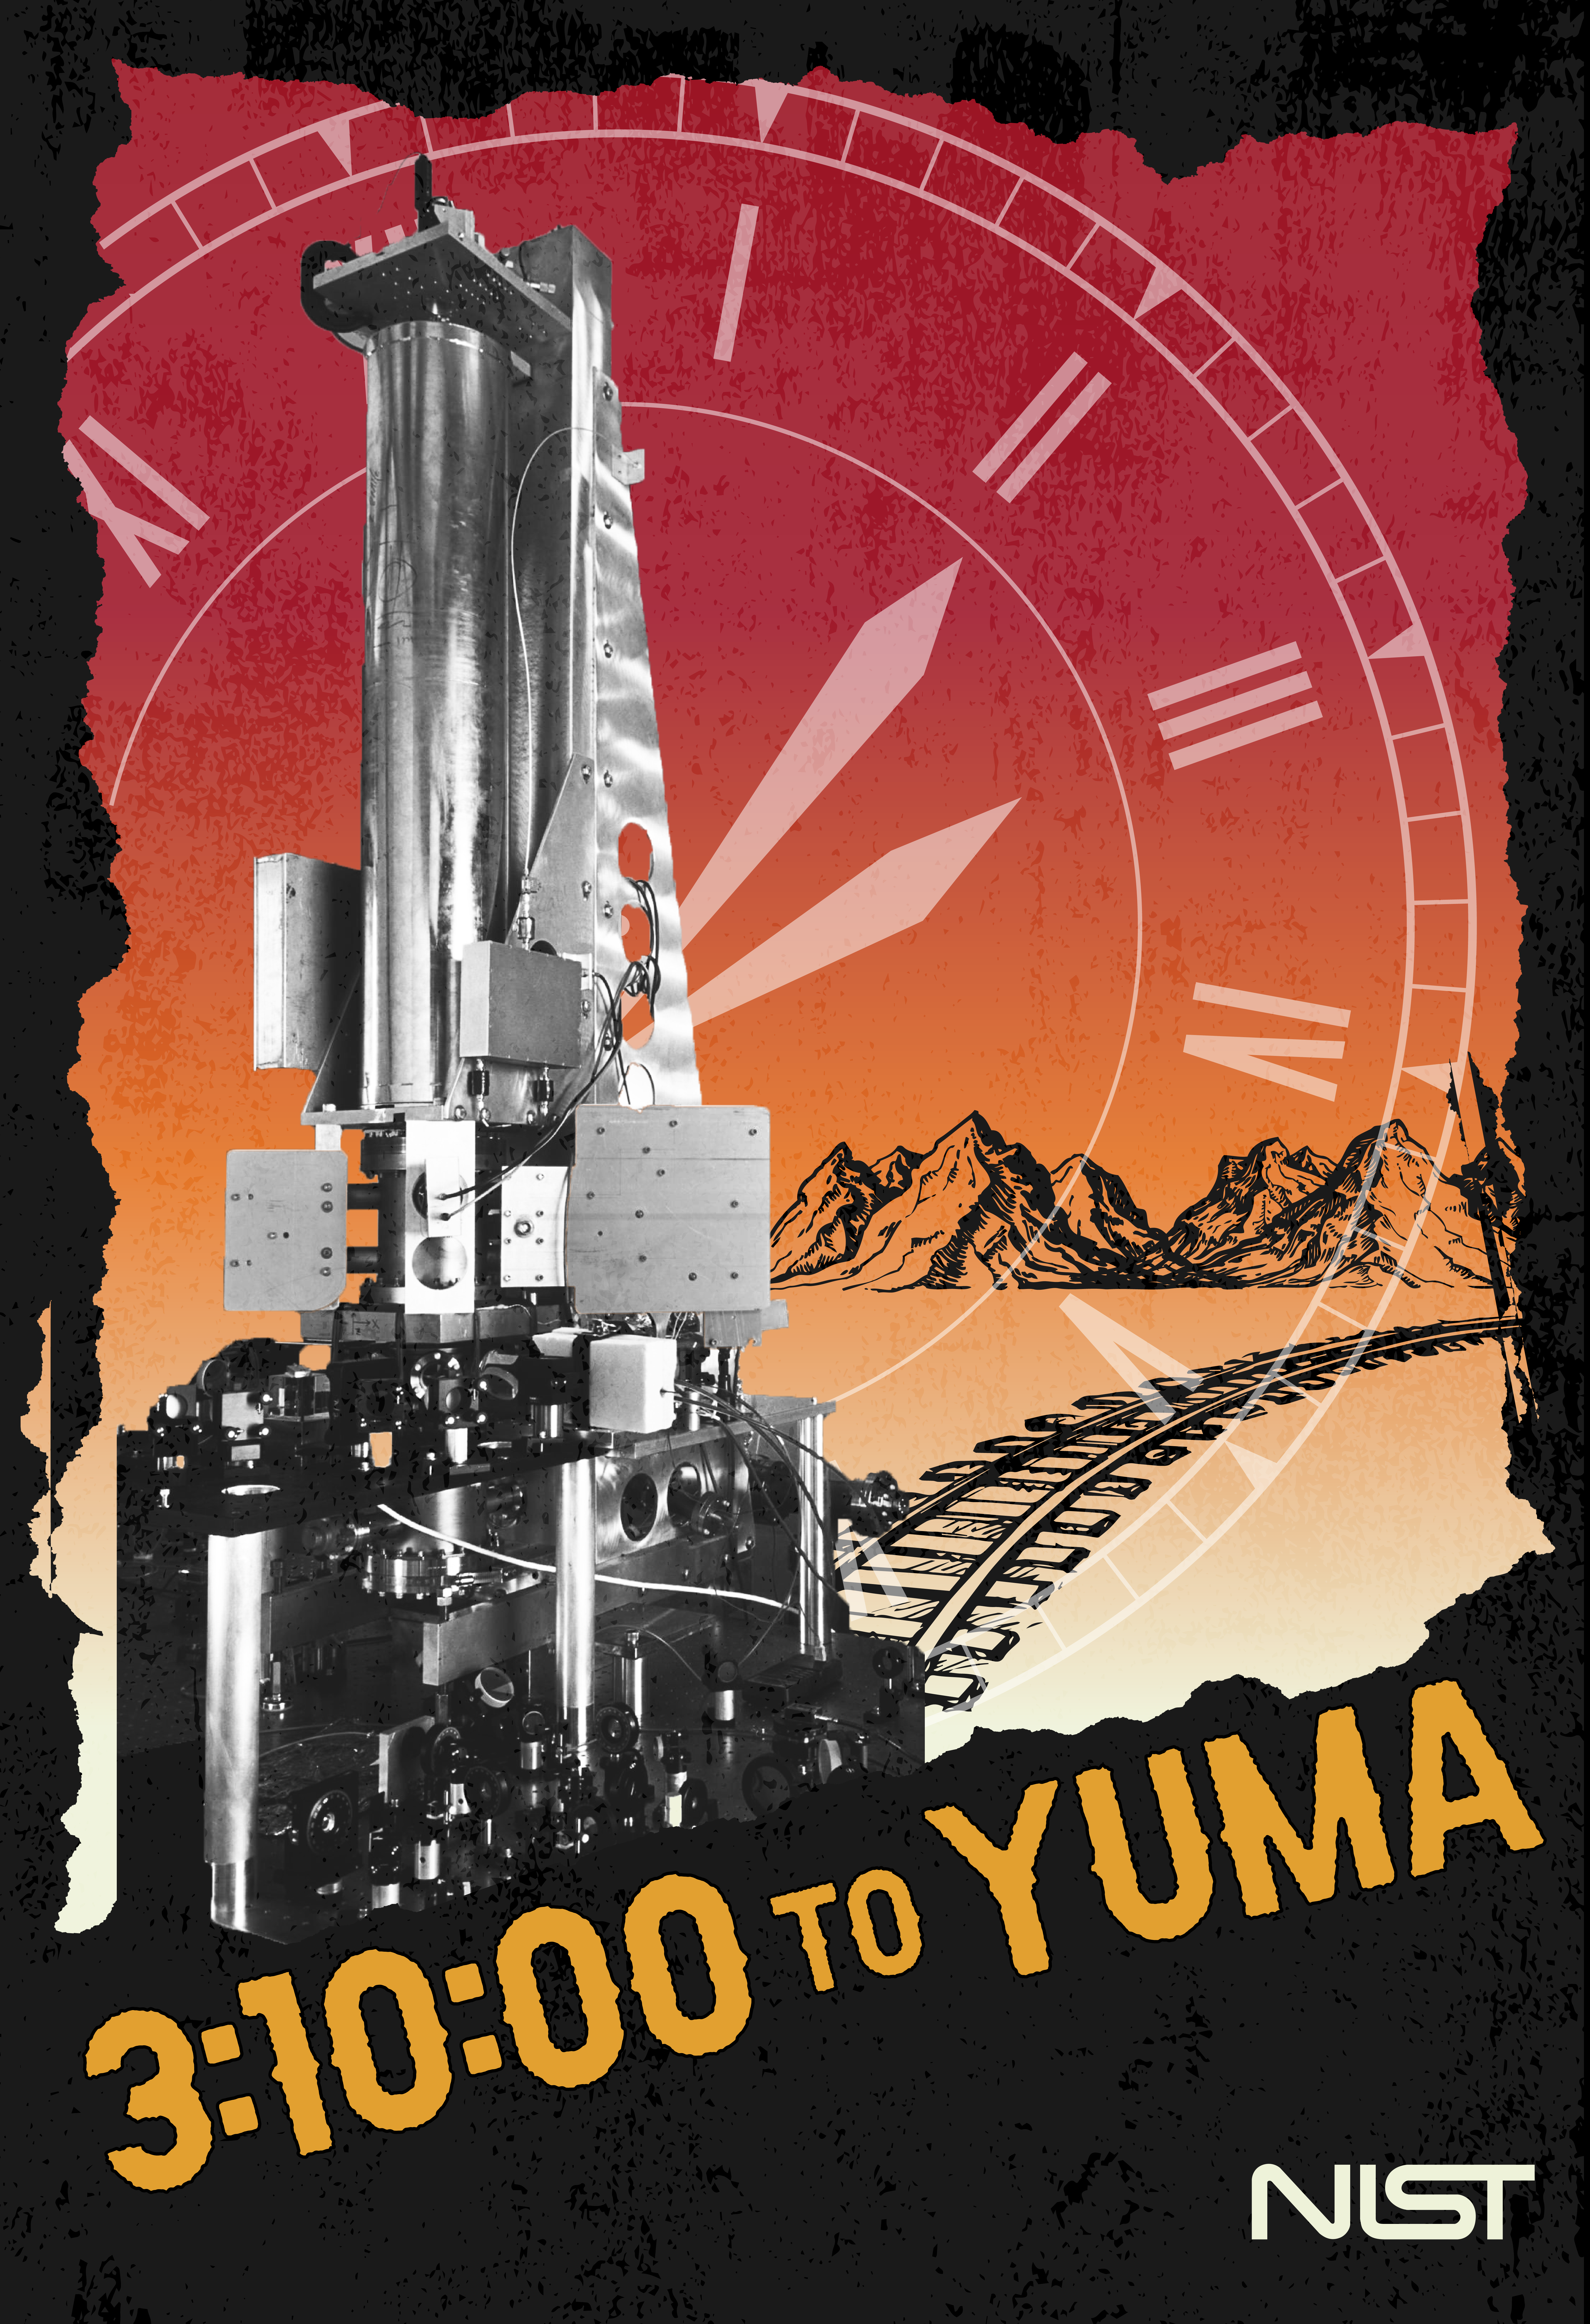 Sunset background. White clock overlaid. Mountains in background. Train tracks. Foreground: black and white of atomic clock. Words: 3:10:00 to Yuma